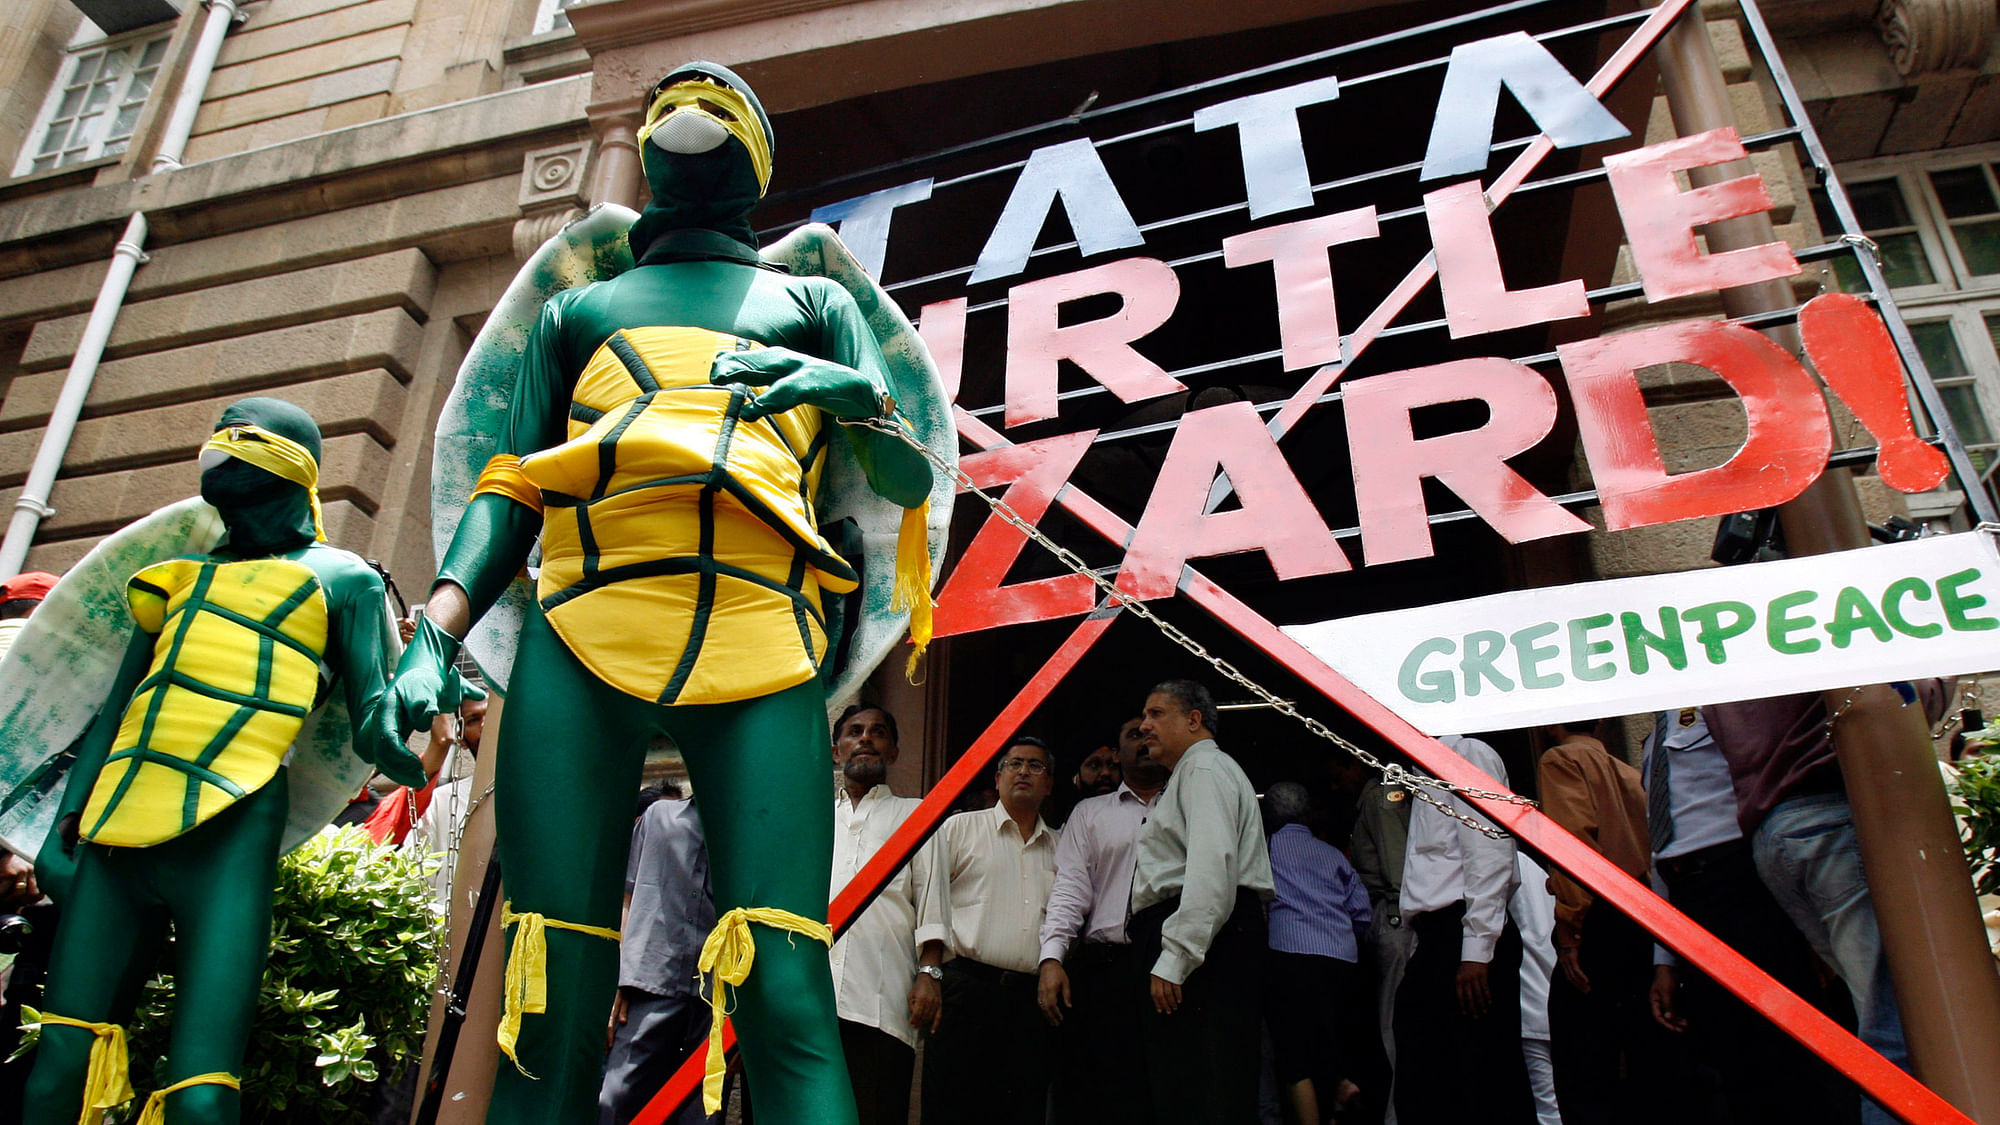 A Greenpeace activist dressed as a turtle protests outside the head office of the Tata group, claiming that a port being built by the group in Orissa will kill endangered Olive Ridley turtles and other marine life. (Photo: Reuters)